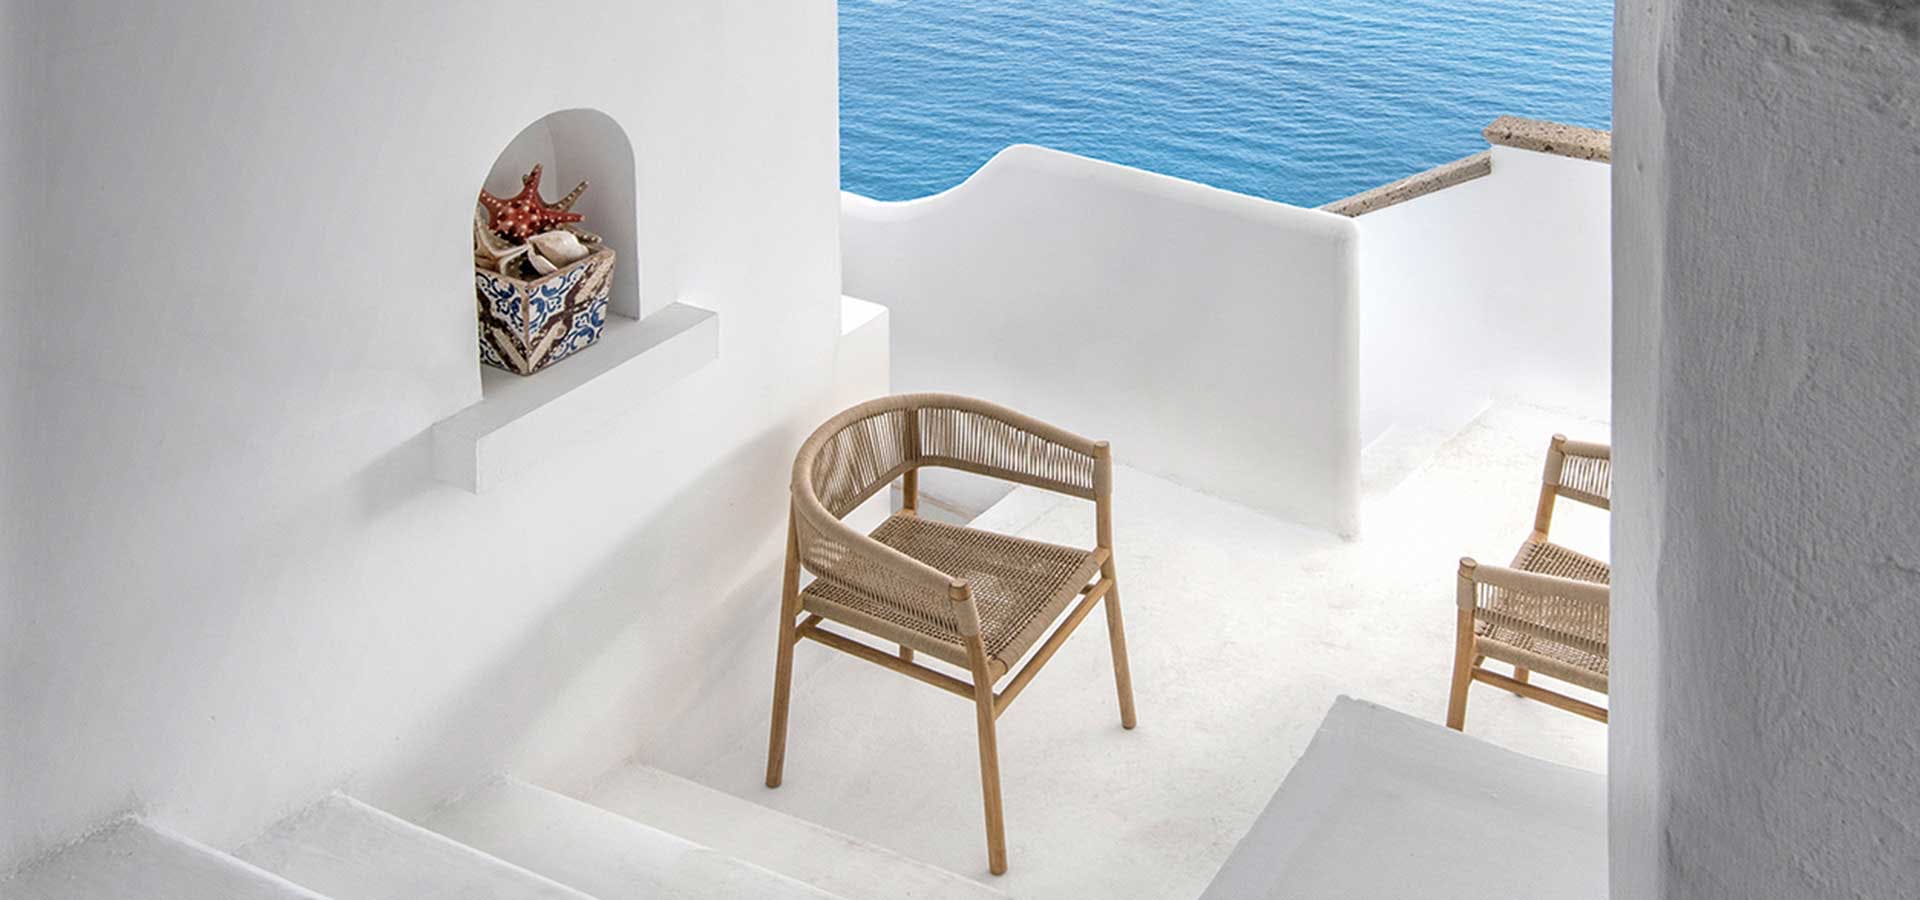 Image number 36 of the current section of Outdoors spaces that break design boundaries with indoors of Cosentino USA